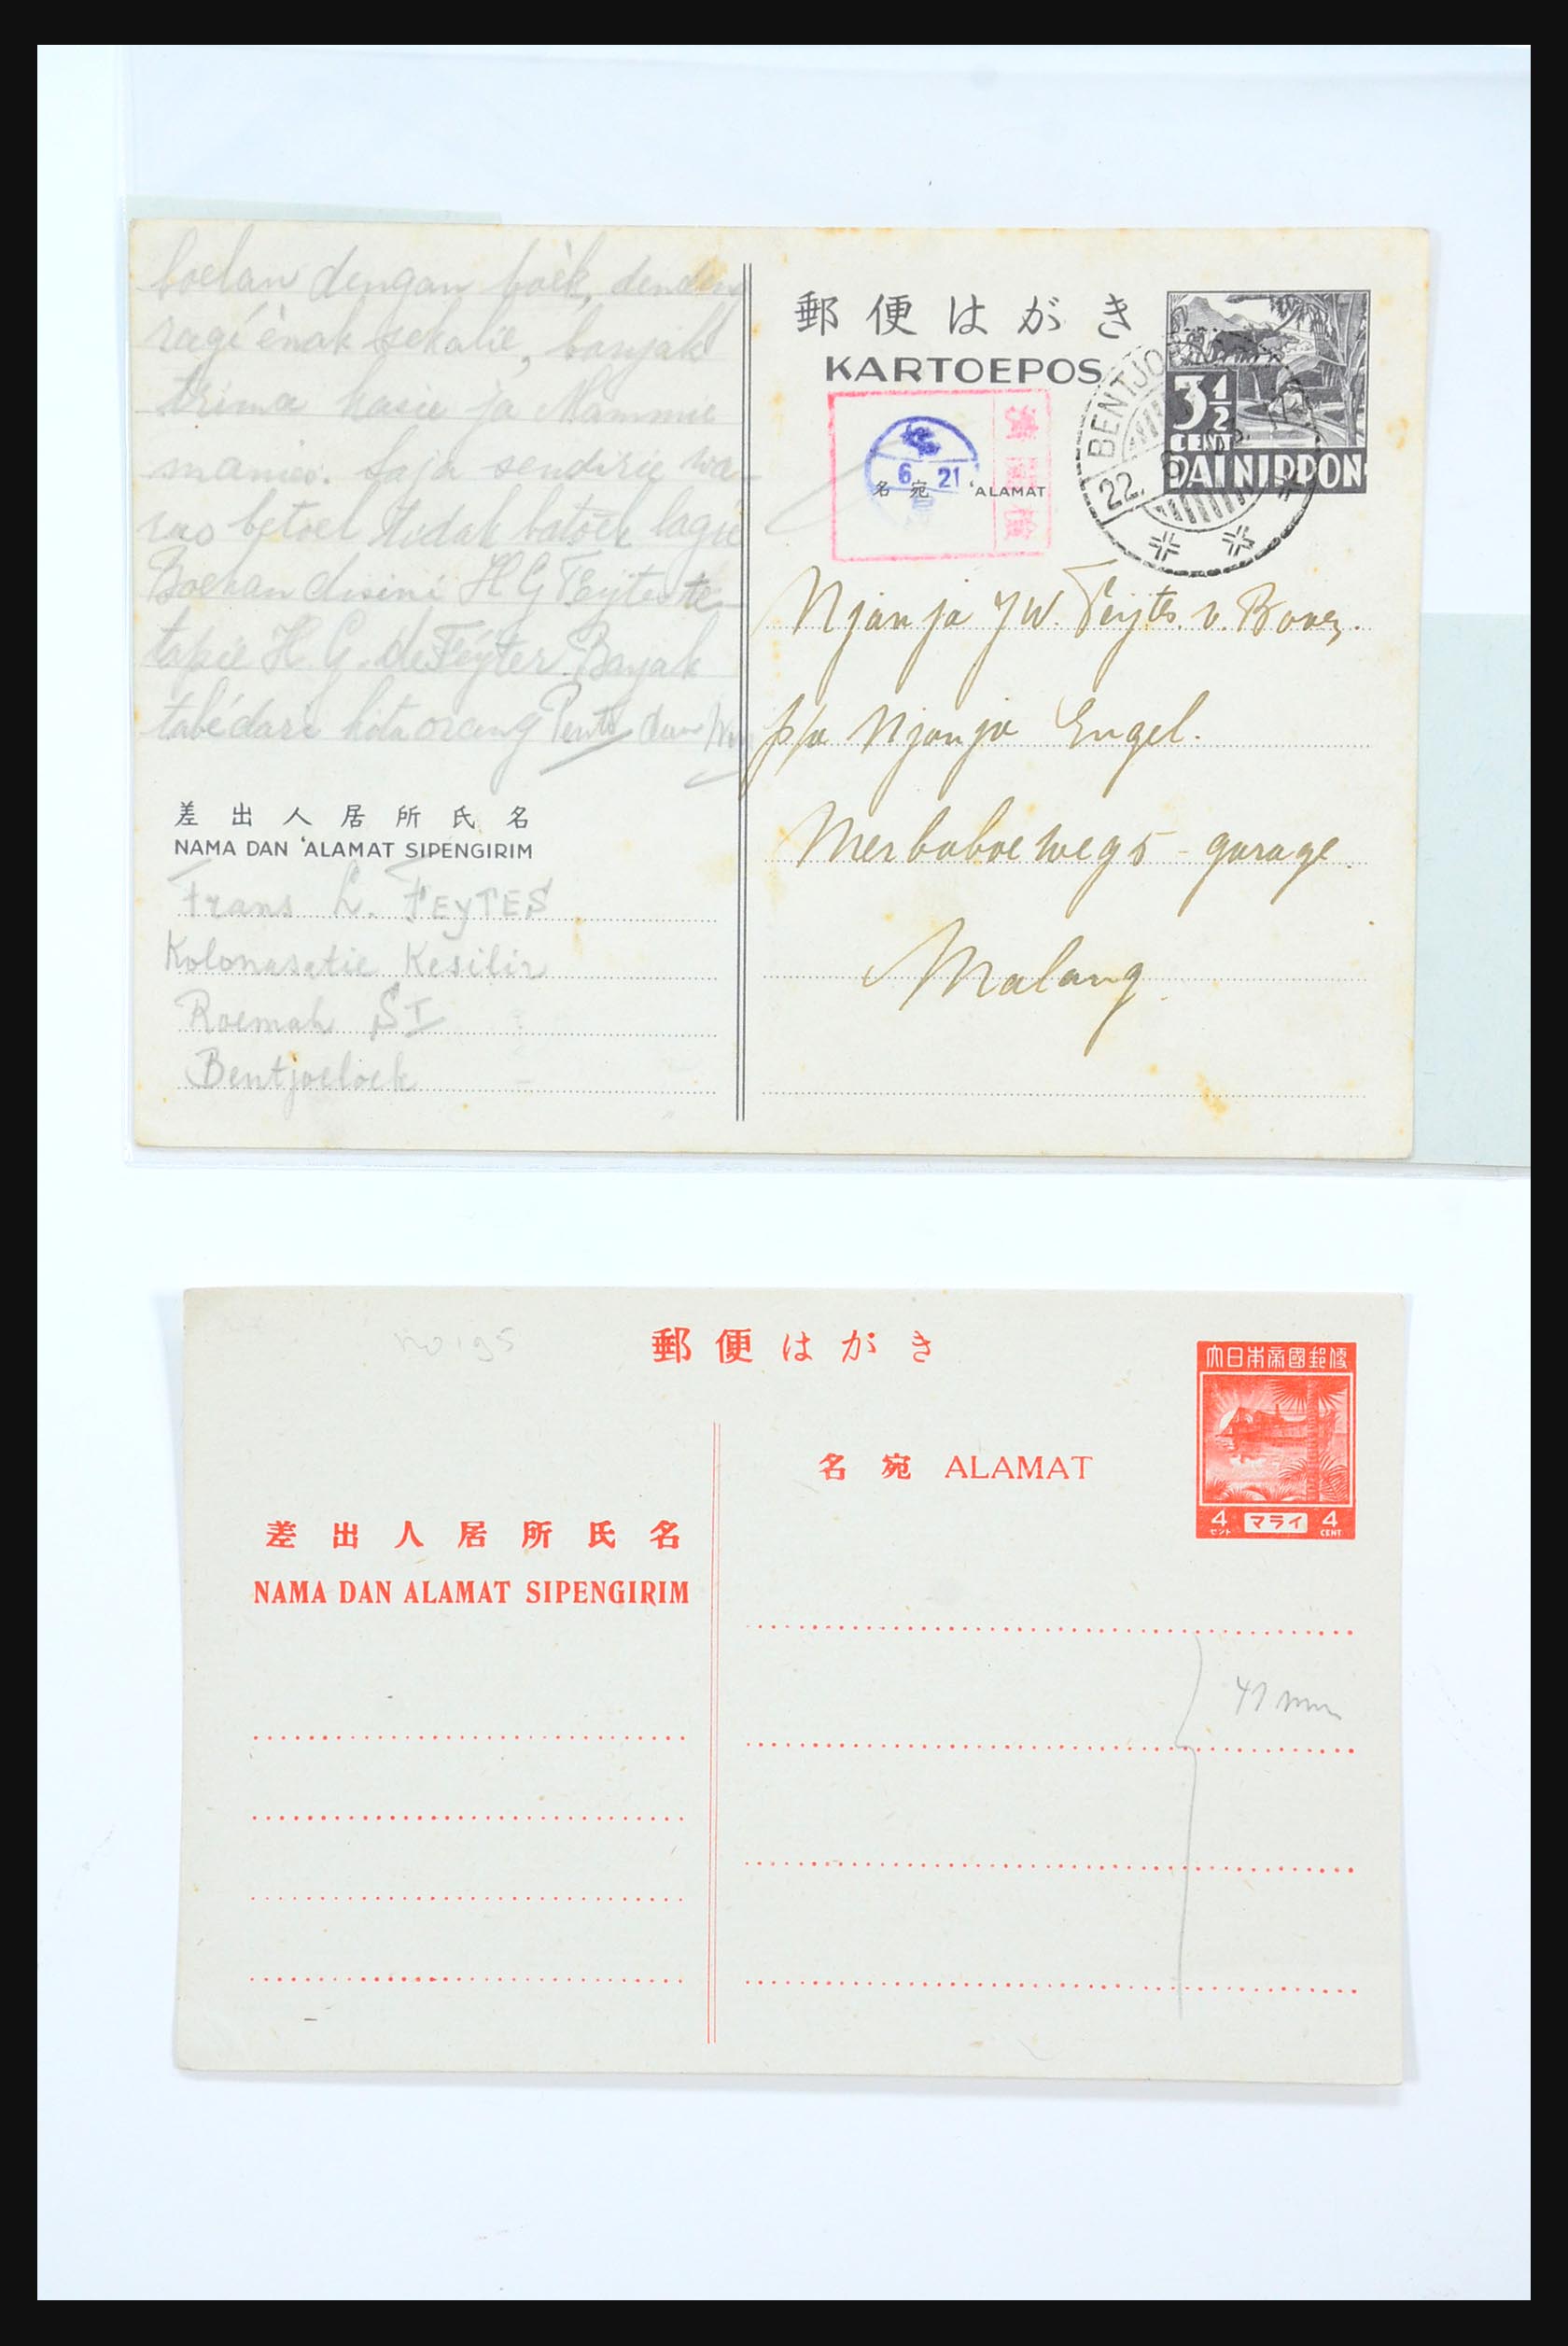 31362 120 - 31362 Netherlands Indies Japanese occupation covers 1942-1945.